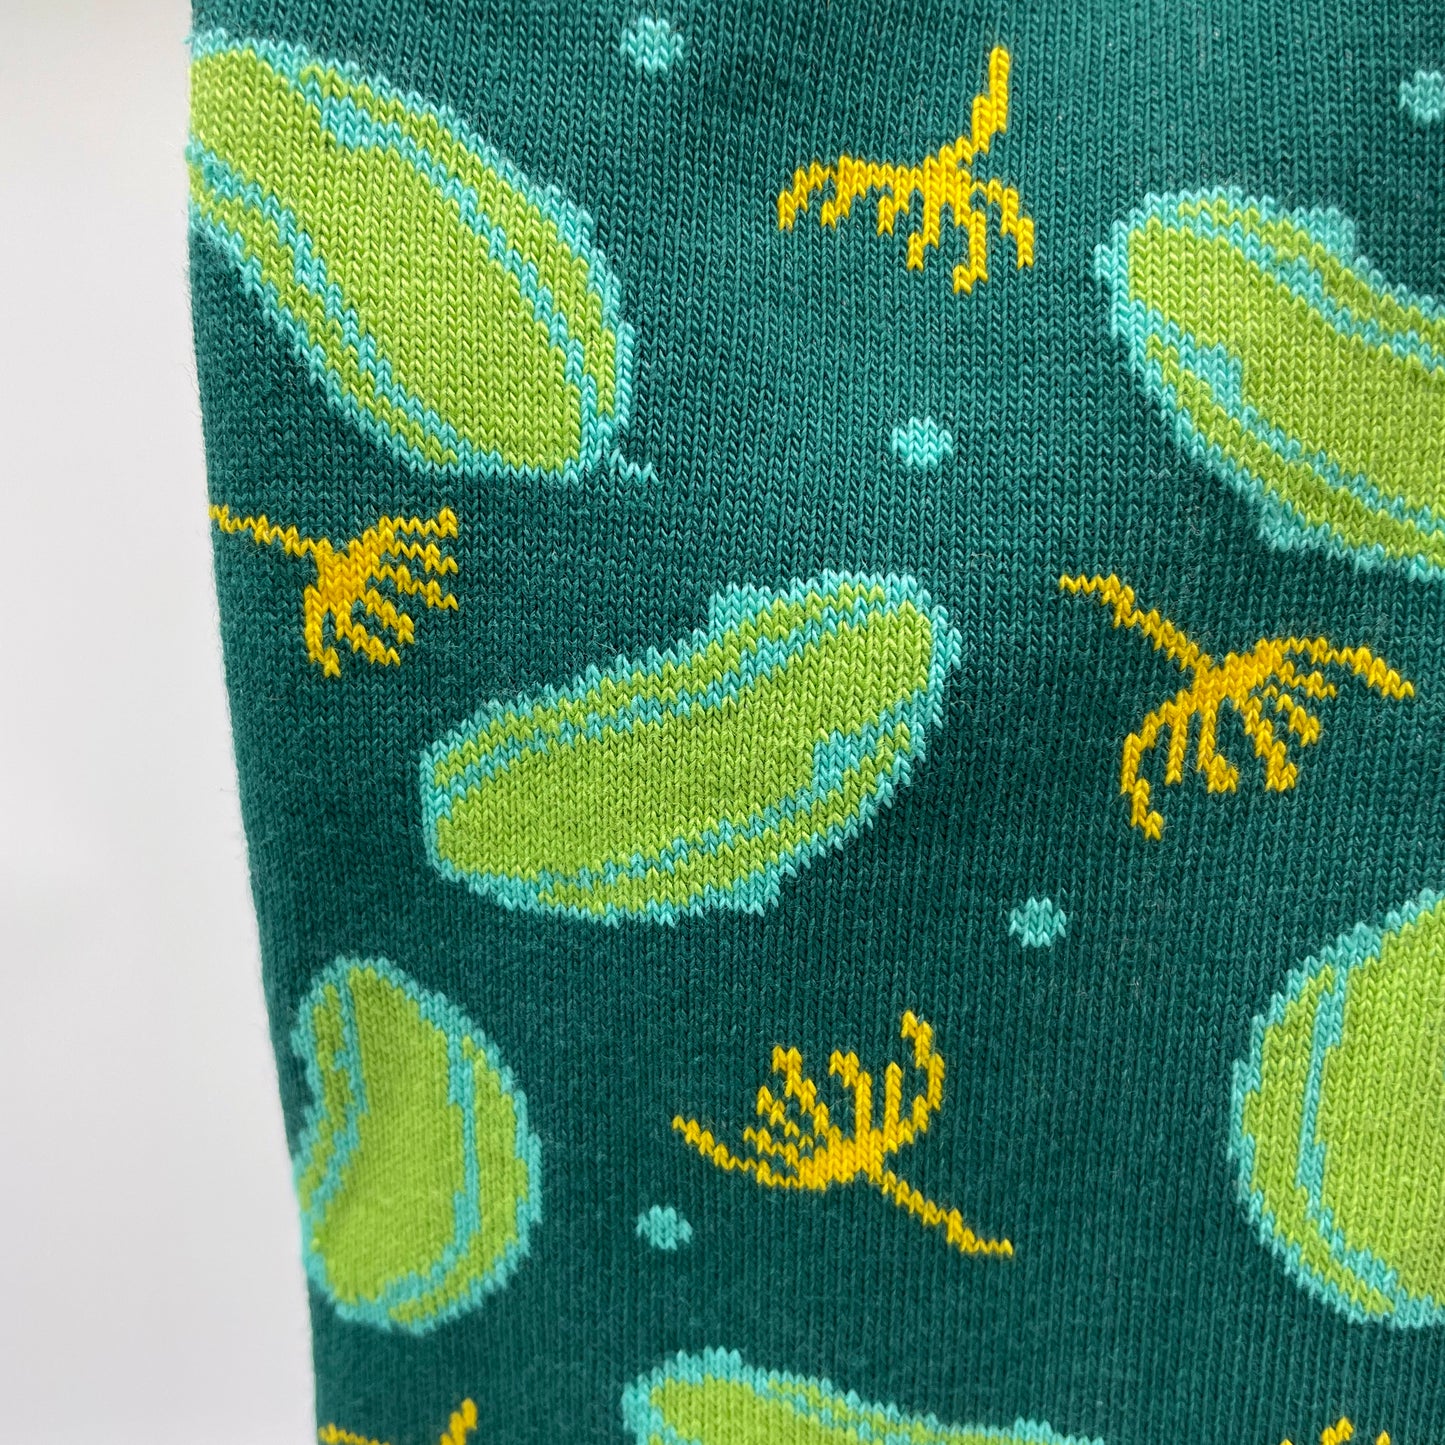 A close-up picture of a dill pickle pattern woven into organic cotton socks.